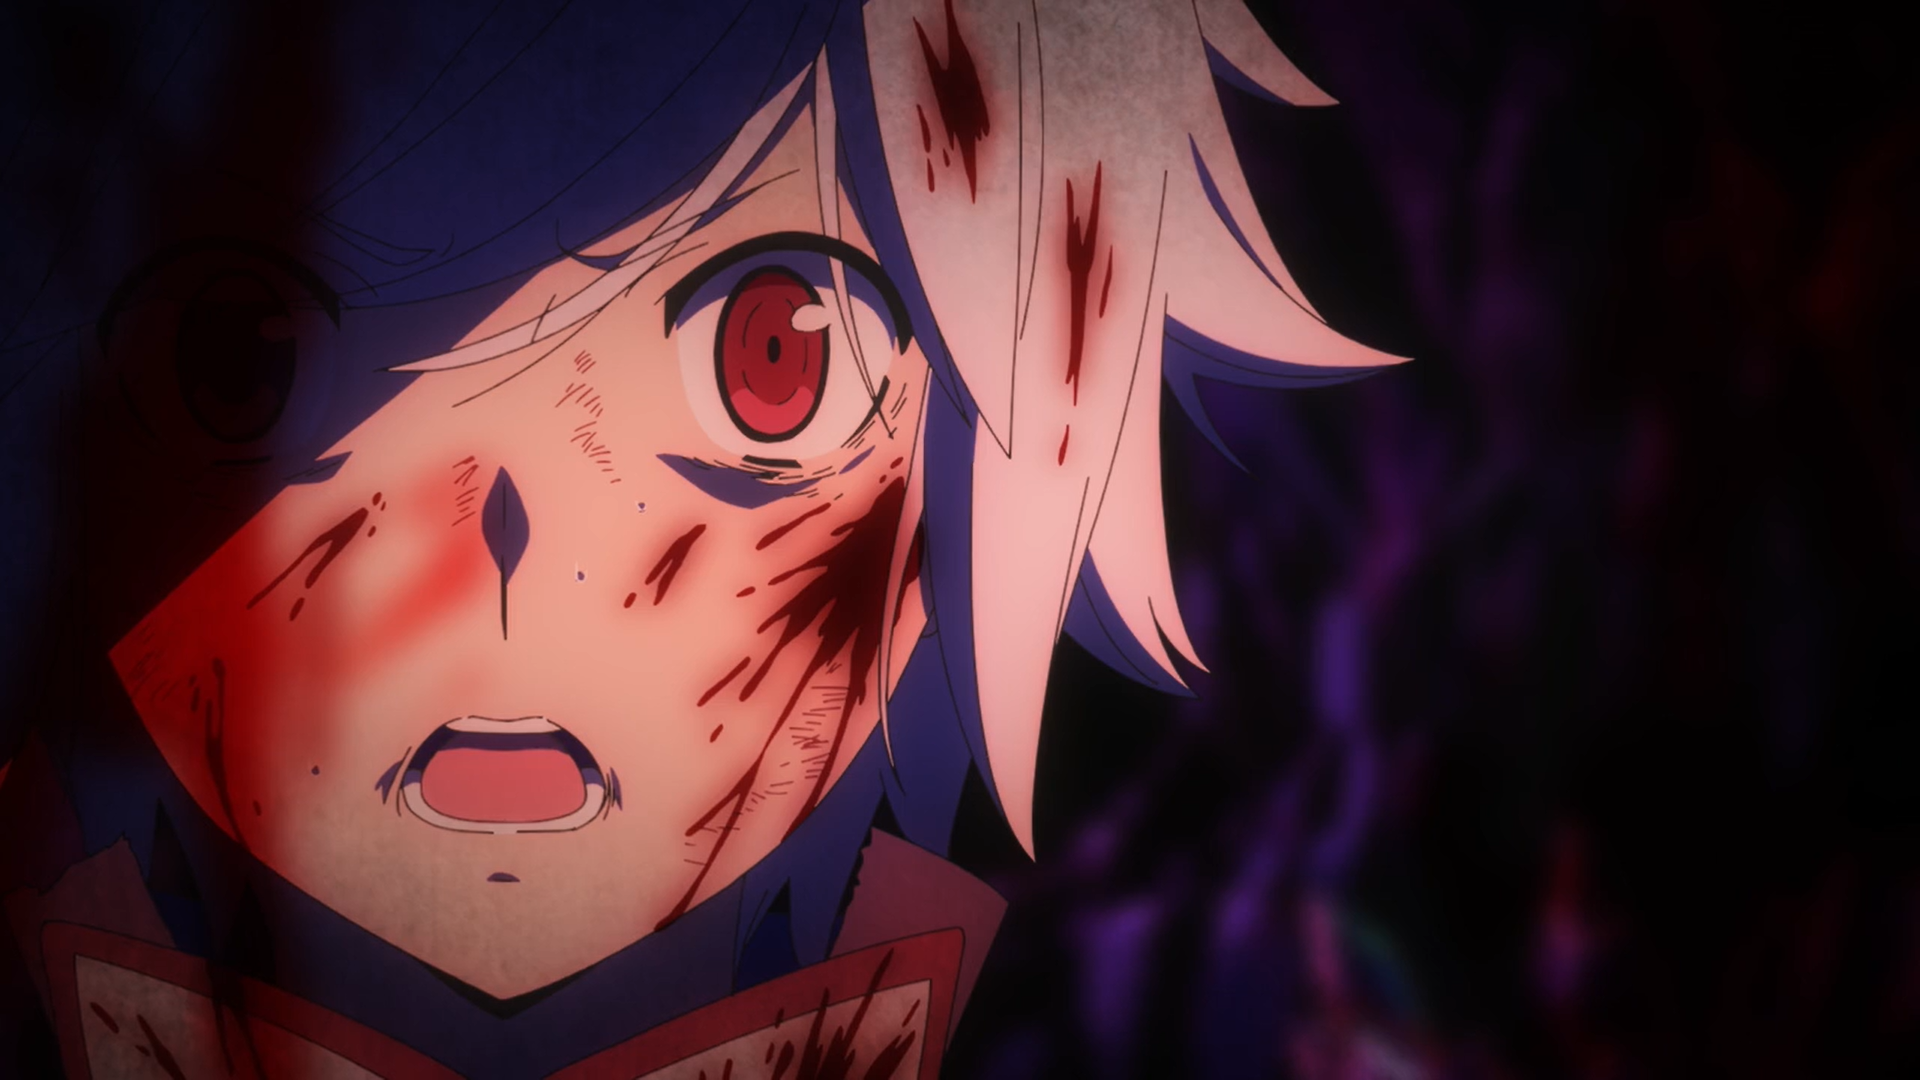 DanMachi Season 4 Gets New Trailer and More Cast Ahead of July 22 Premiere